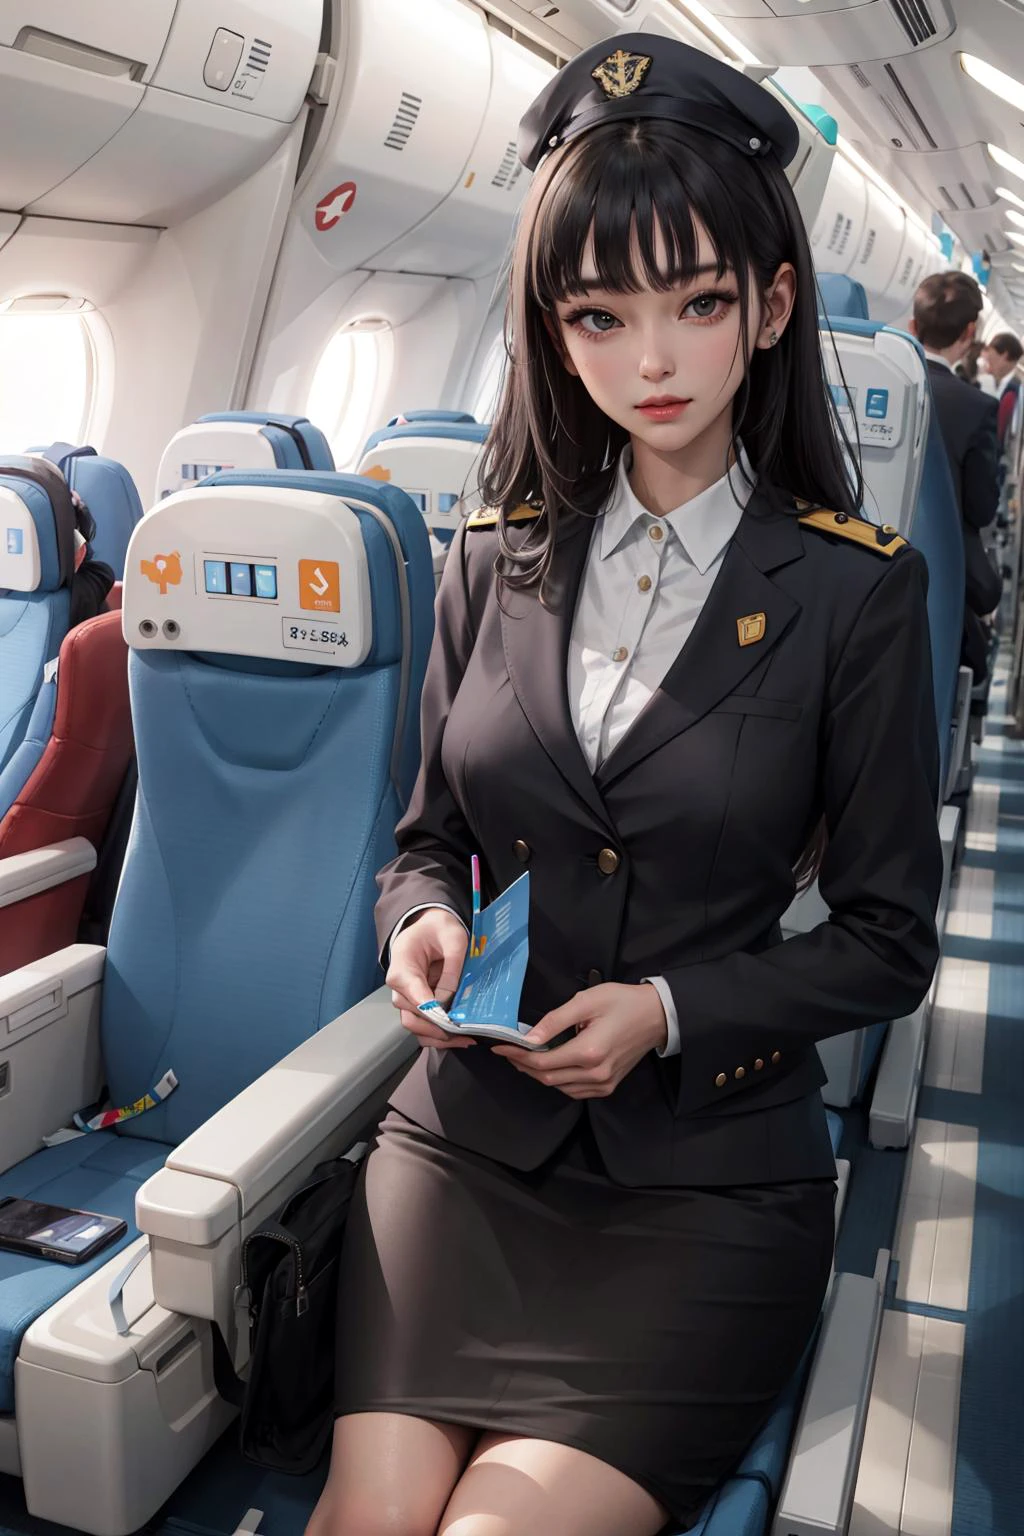 (masterpiece:1.2, best quality), 1lady, solo, Flight attendant, Uniform, Airplane, Serving passengers, Providing safety instructions, Responding to emergencies, bangs, (shiny skin:1.15),